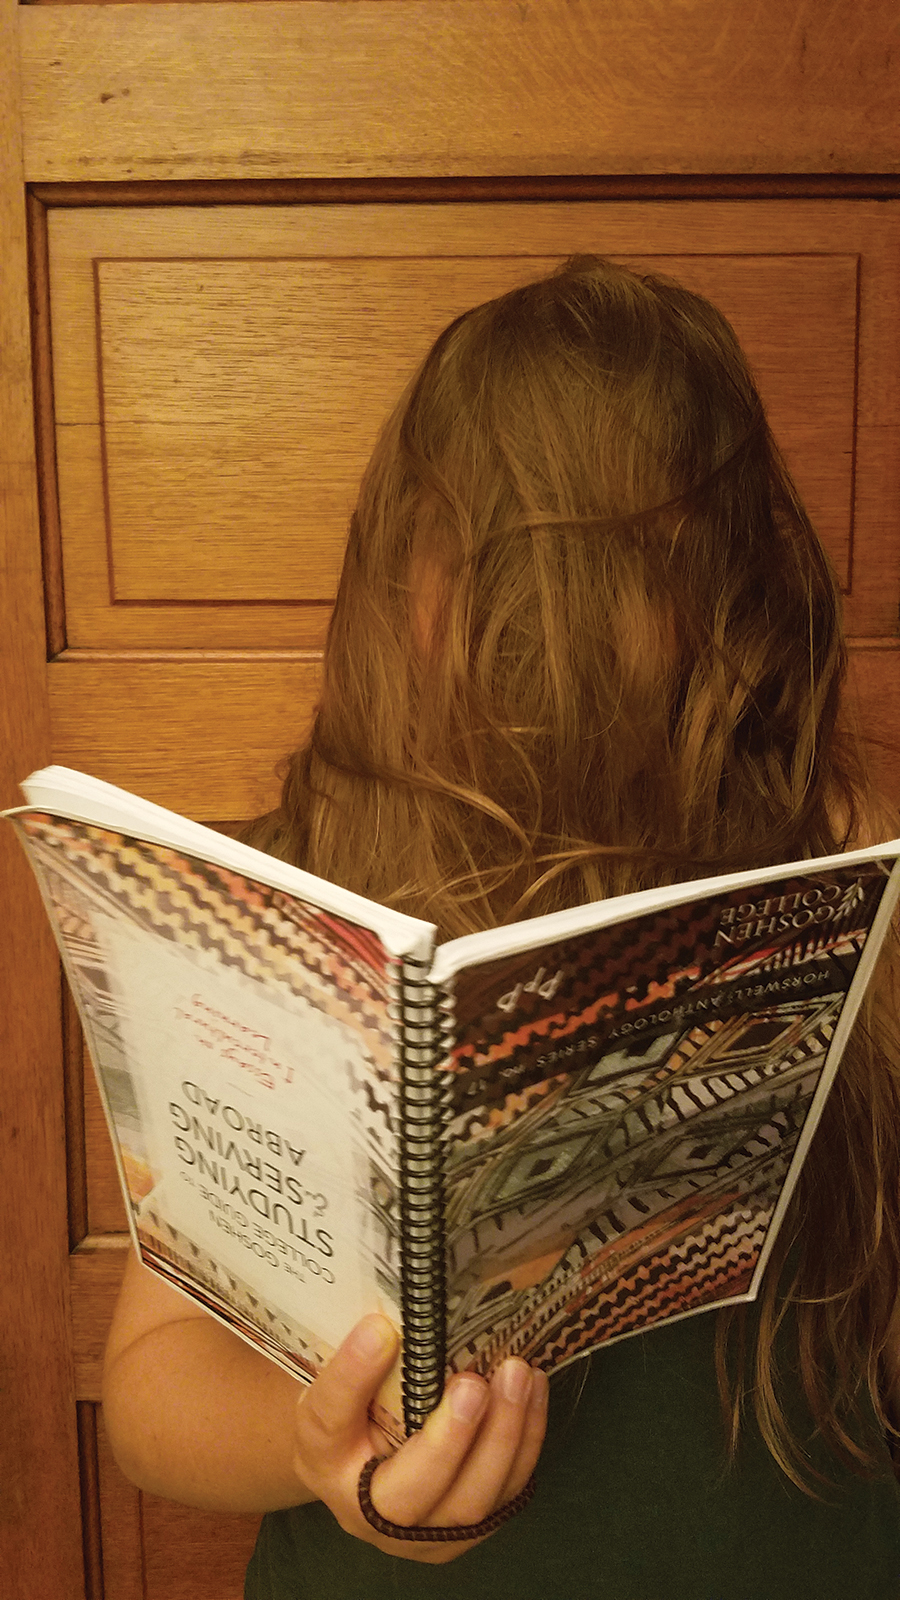 Katie Yoder covers her face with her hair while reading an upside down book